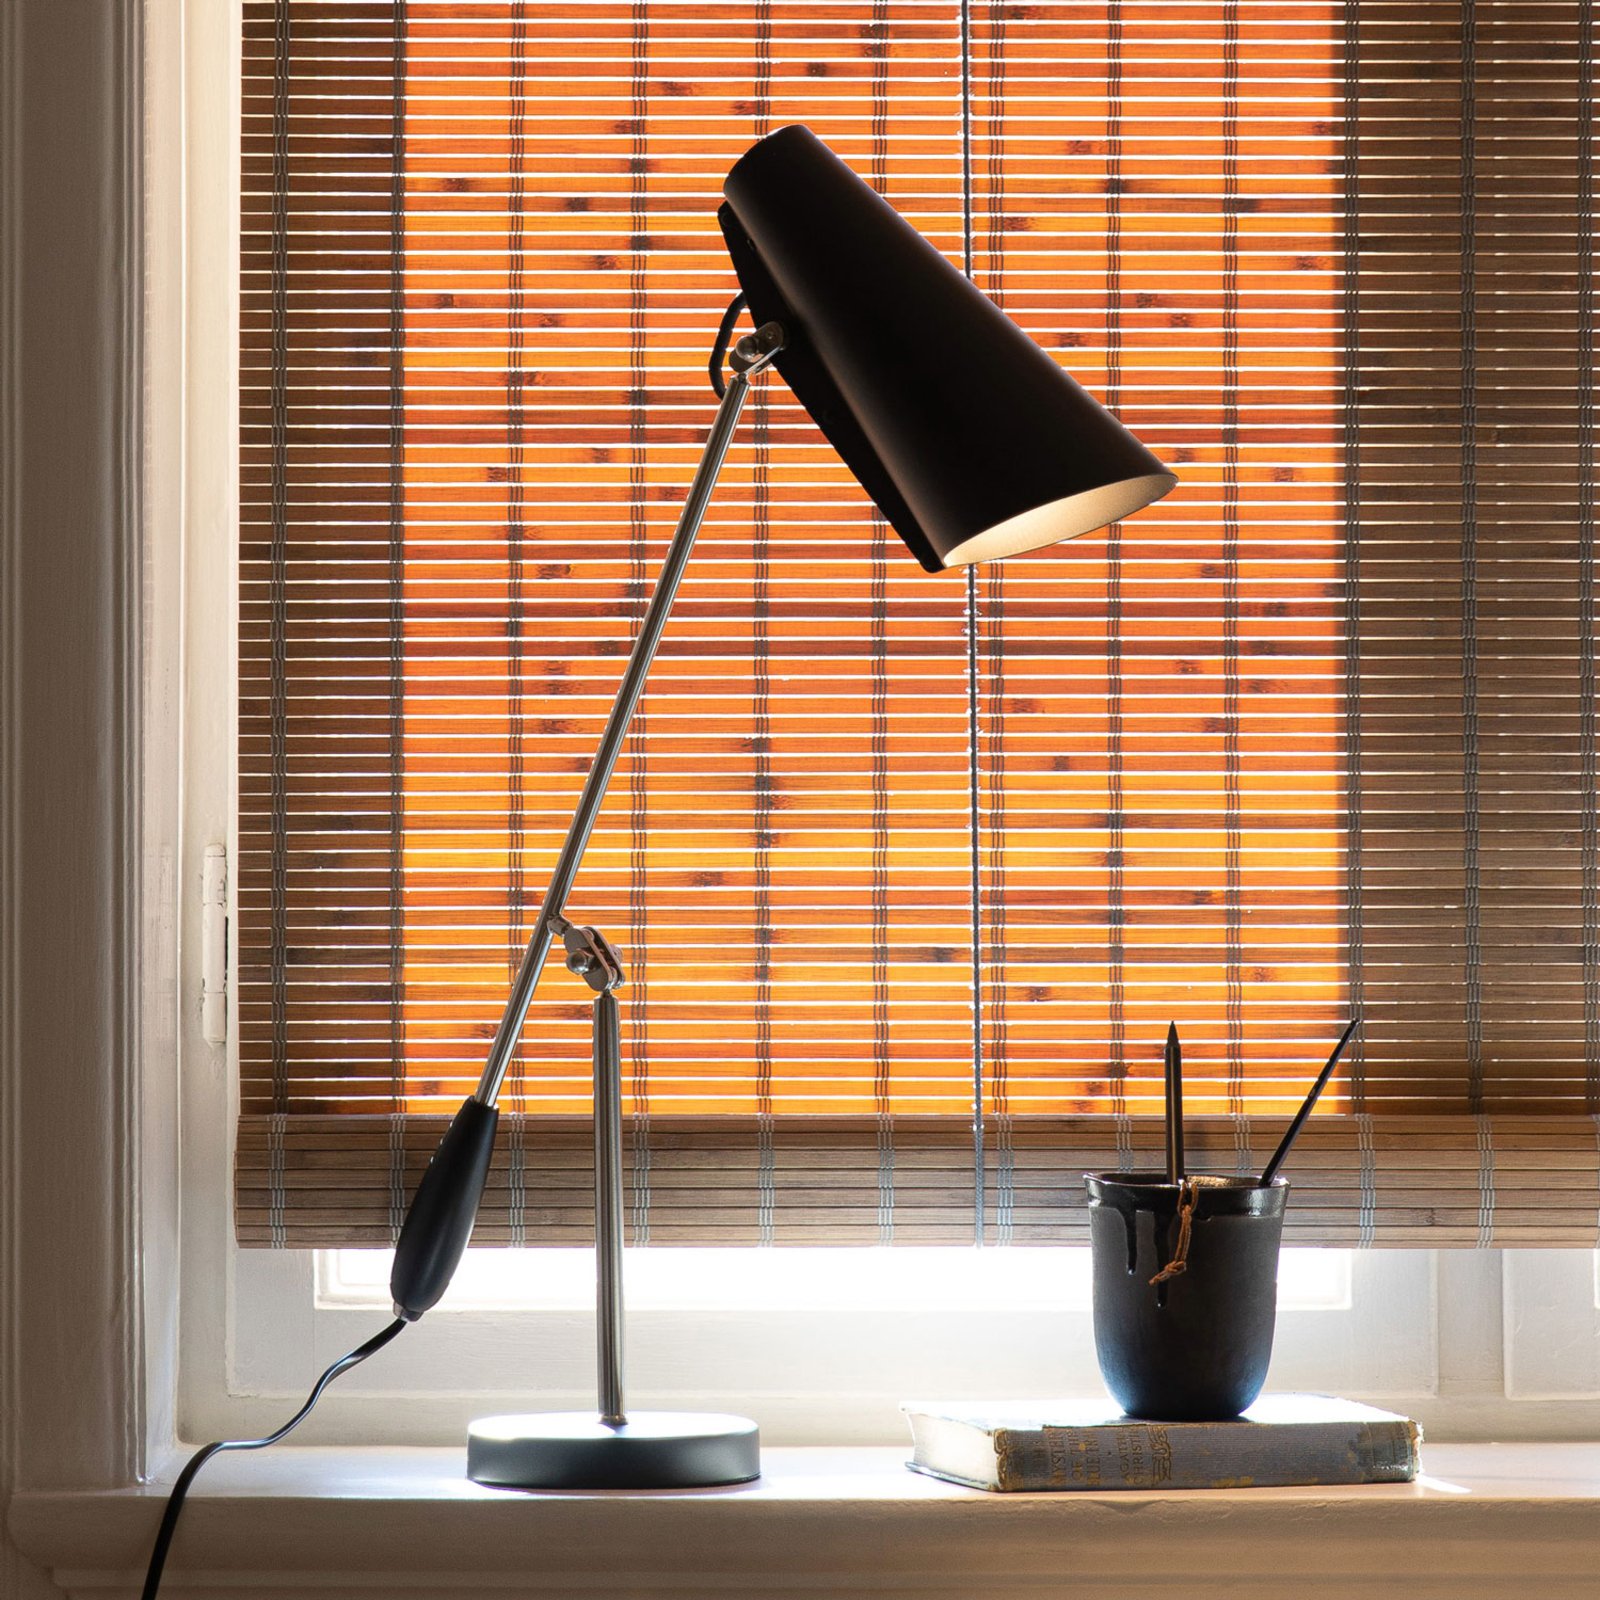 Northern Birdy - table lamp in black and steel